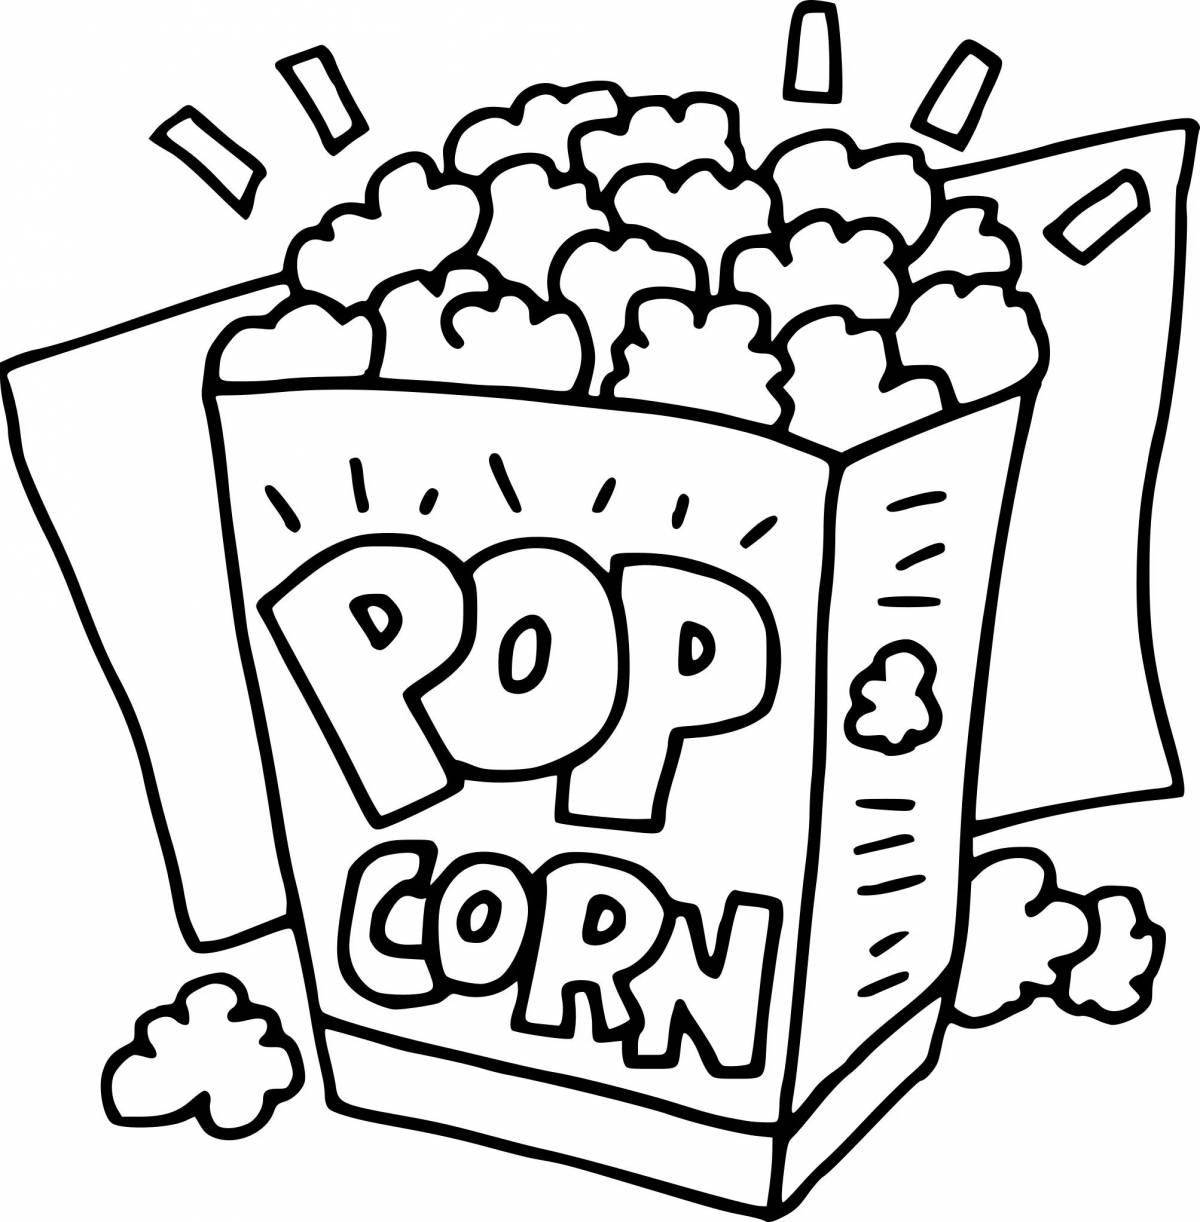 Attractive popcorn coloring book for kids